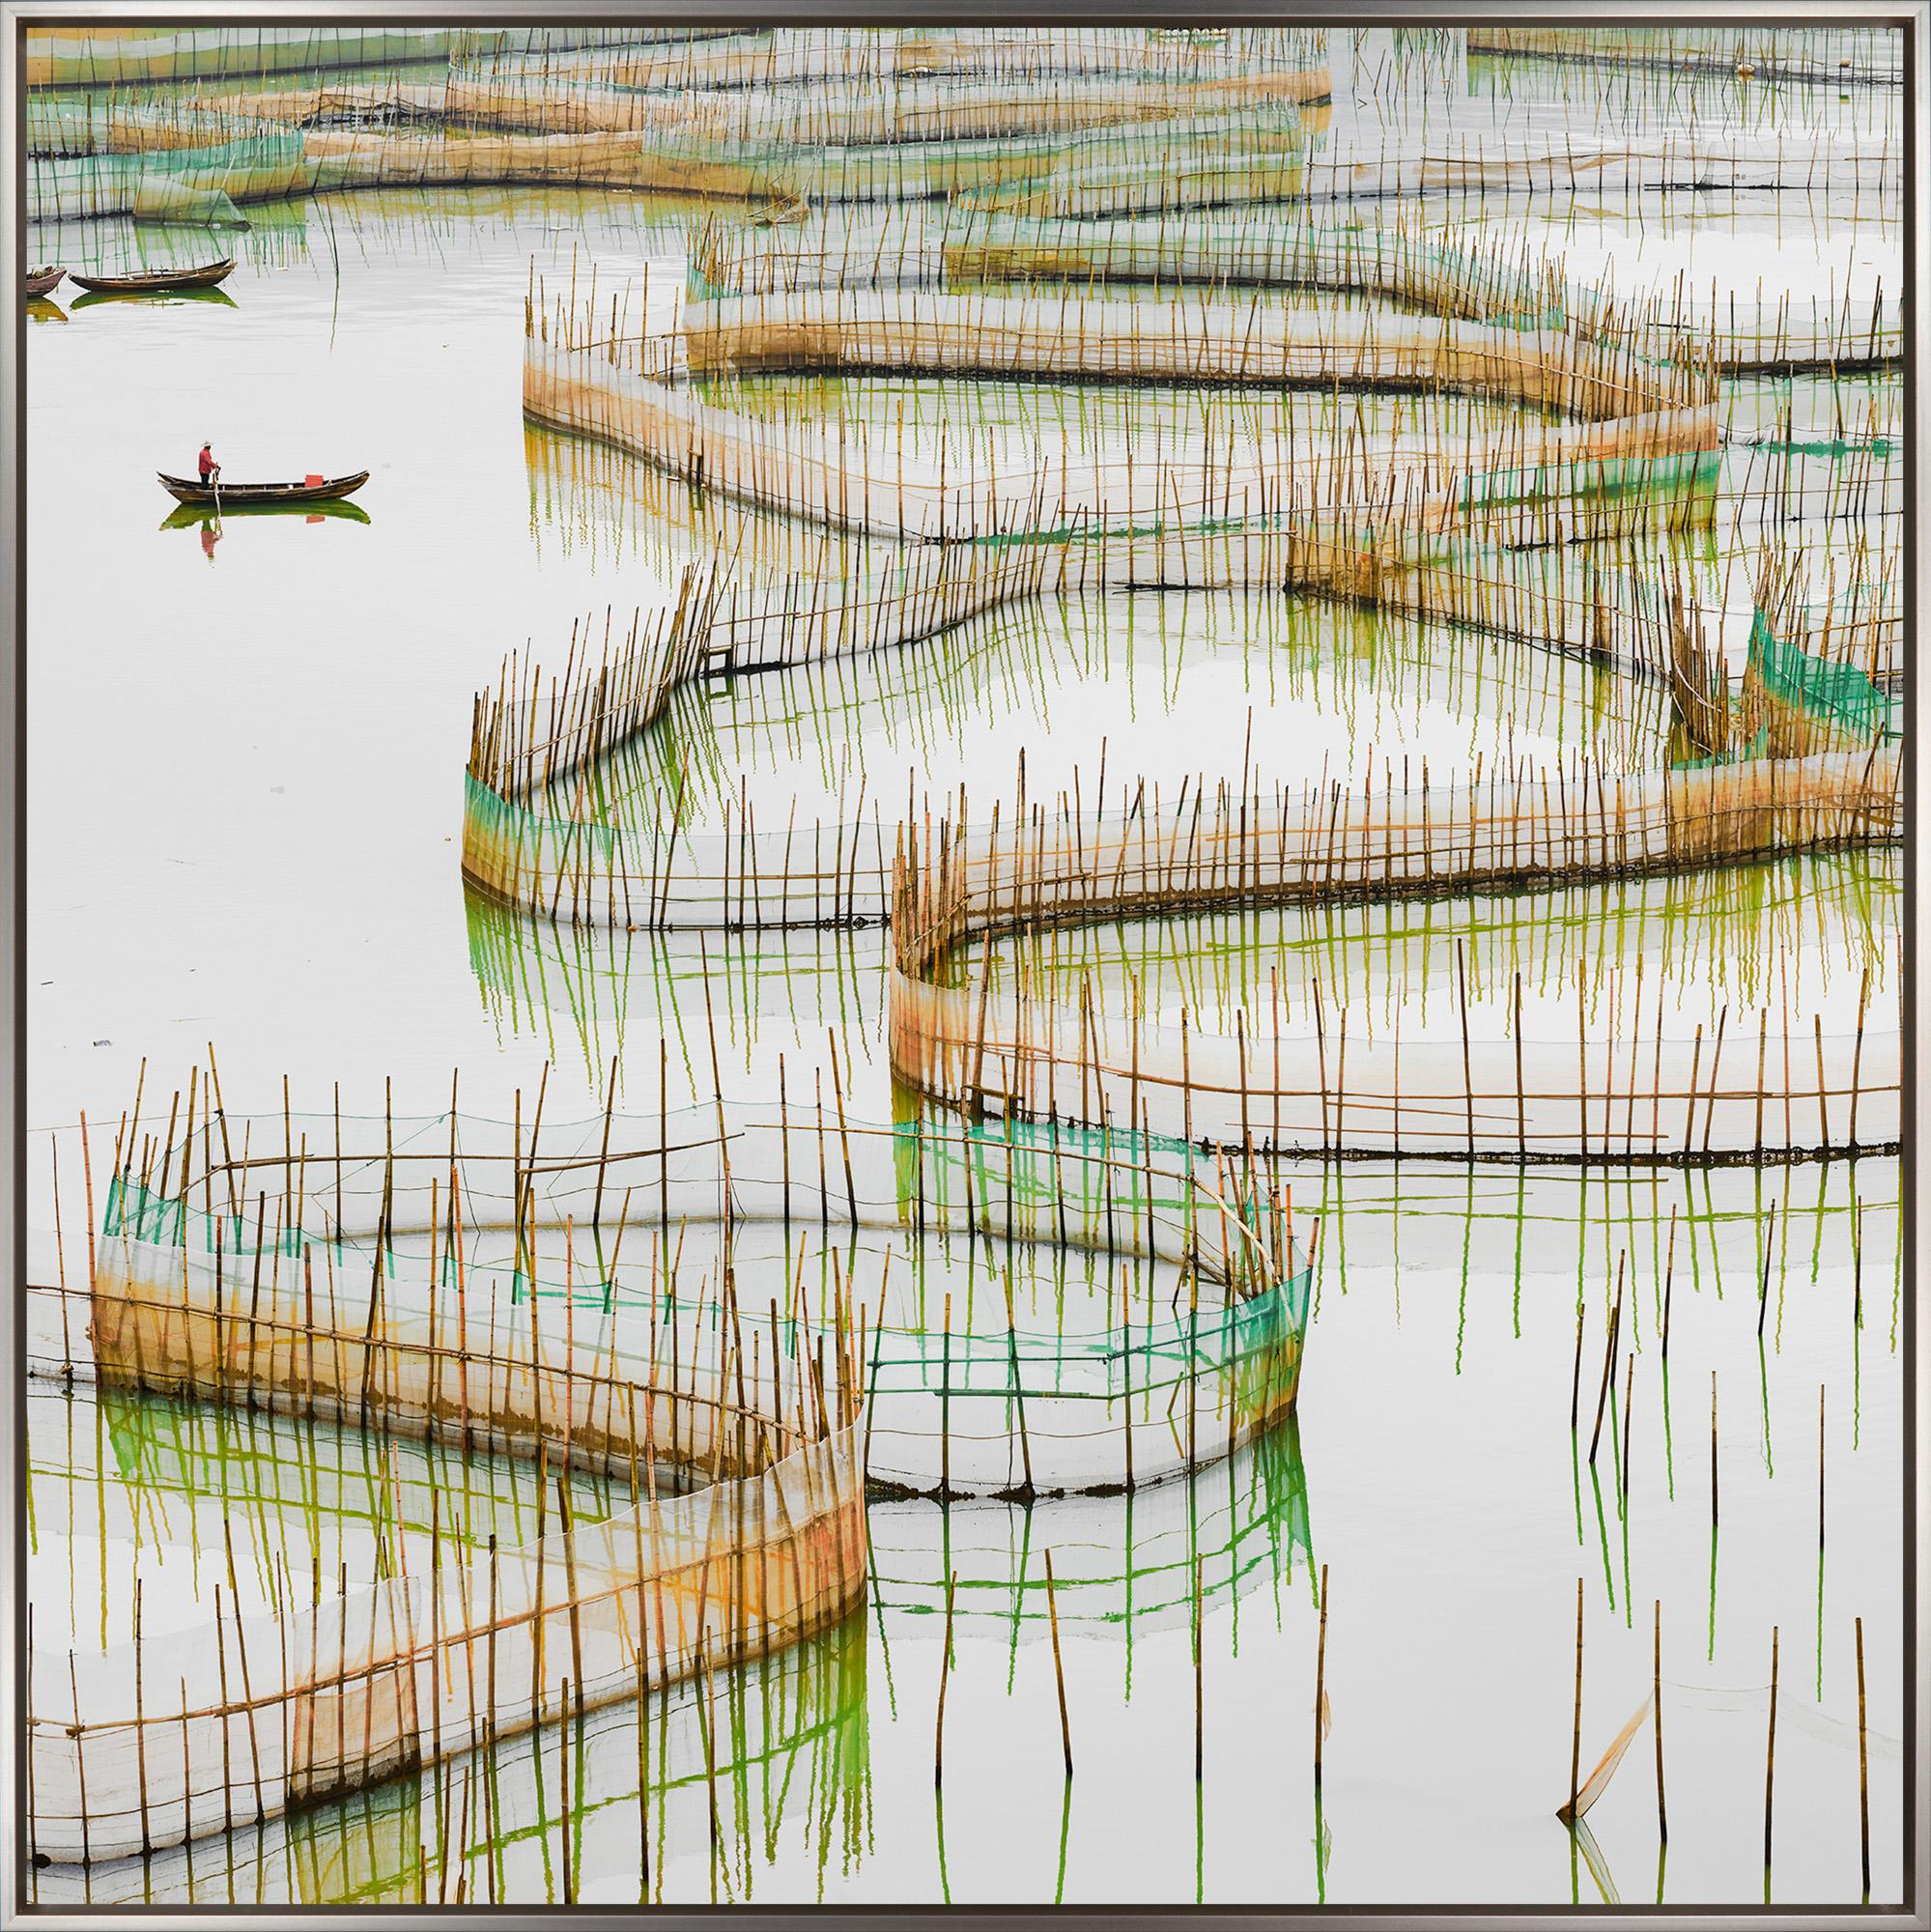 "Nets Study 8" is a framed photograph on aluminum by David Burdeny, depicting small boats amid shallow waters in China. The colorful nets zig and zag across the waterscape, evoking both movement and serenity. The image quality is crisp and true to